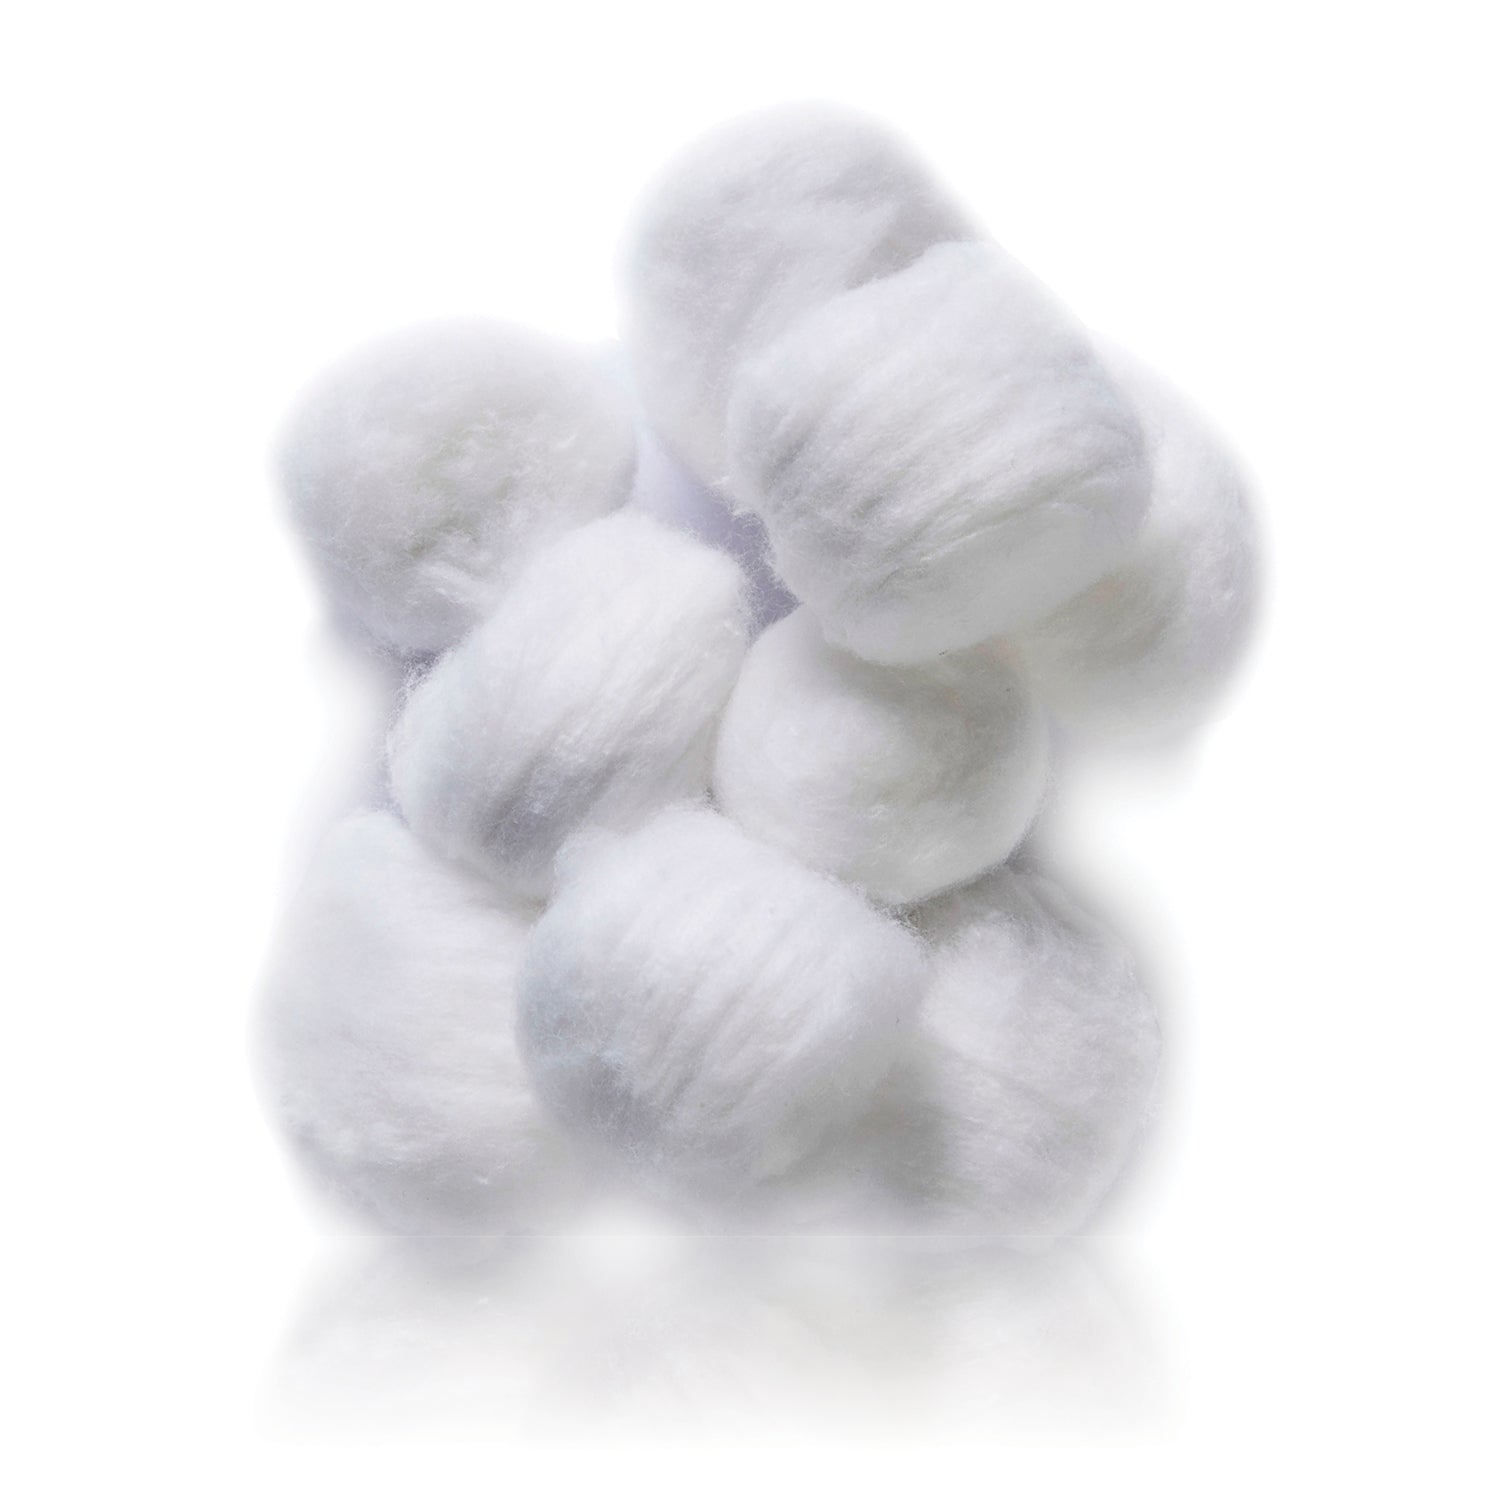 Robinsons Cotton Wool Balls | Pack of 200